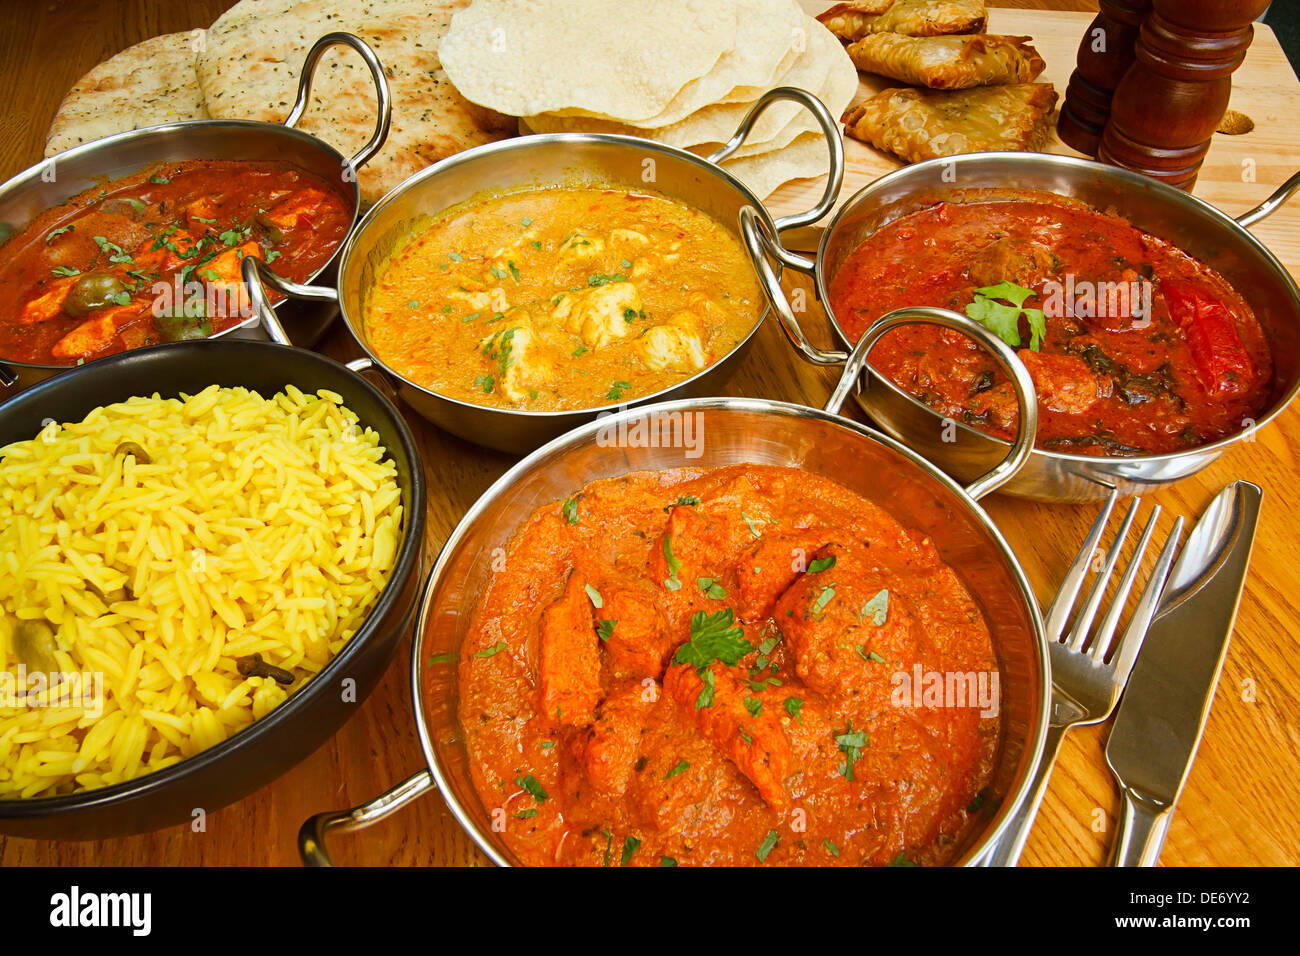 Varied selection of indian cuisine on table including Chicken Tikka, beef rogan josh, chicken jalfrezi and chicken korma. Stock Photo